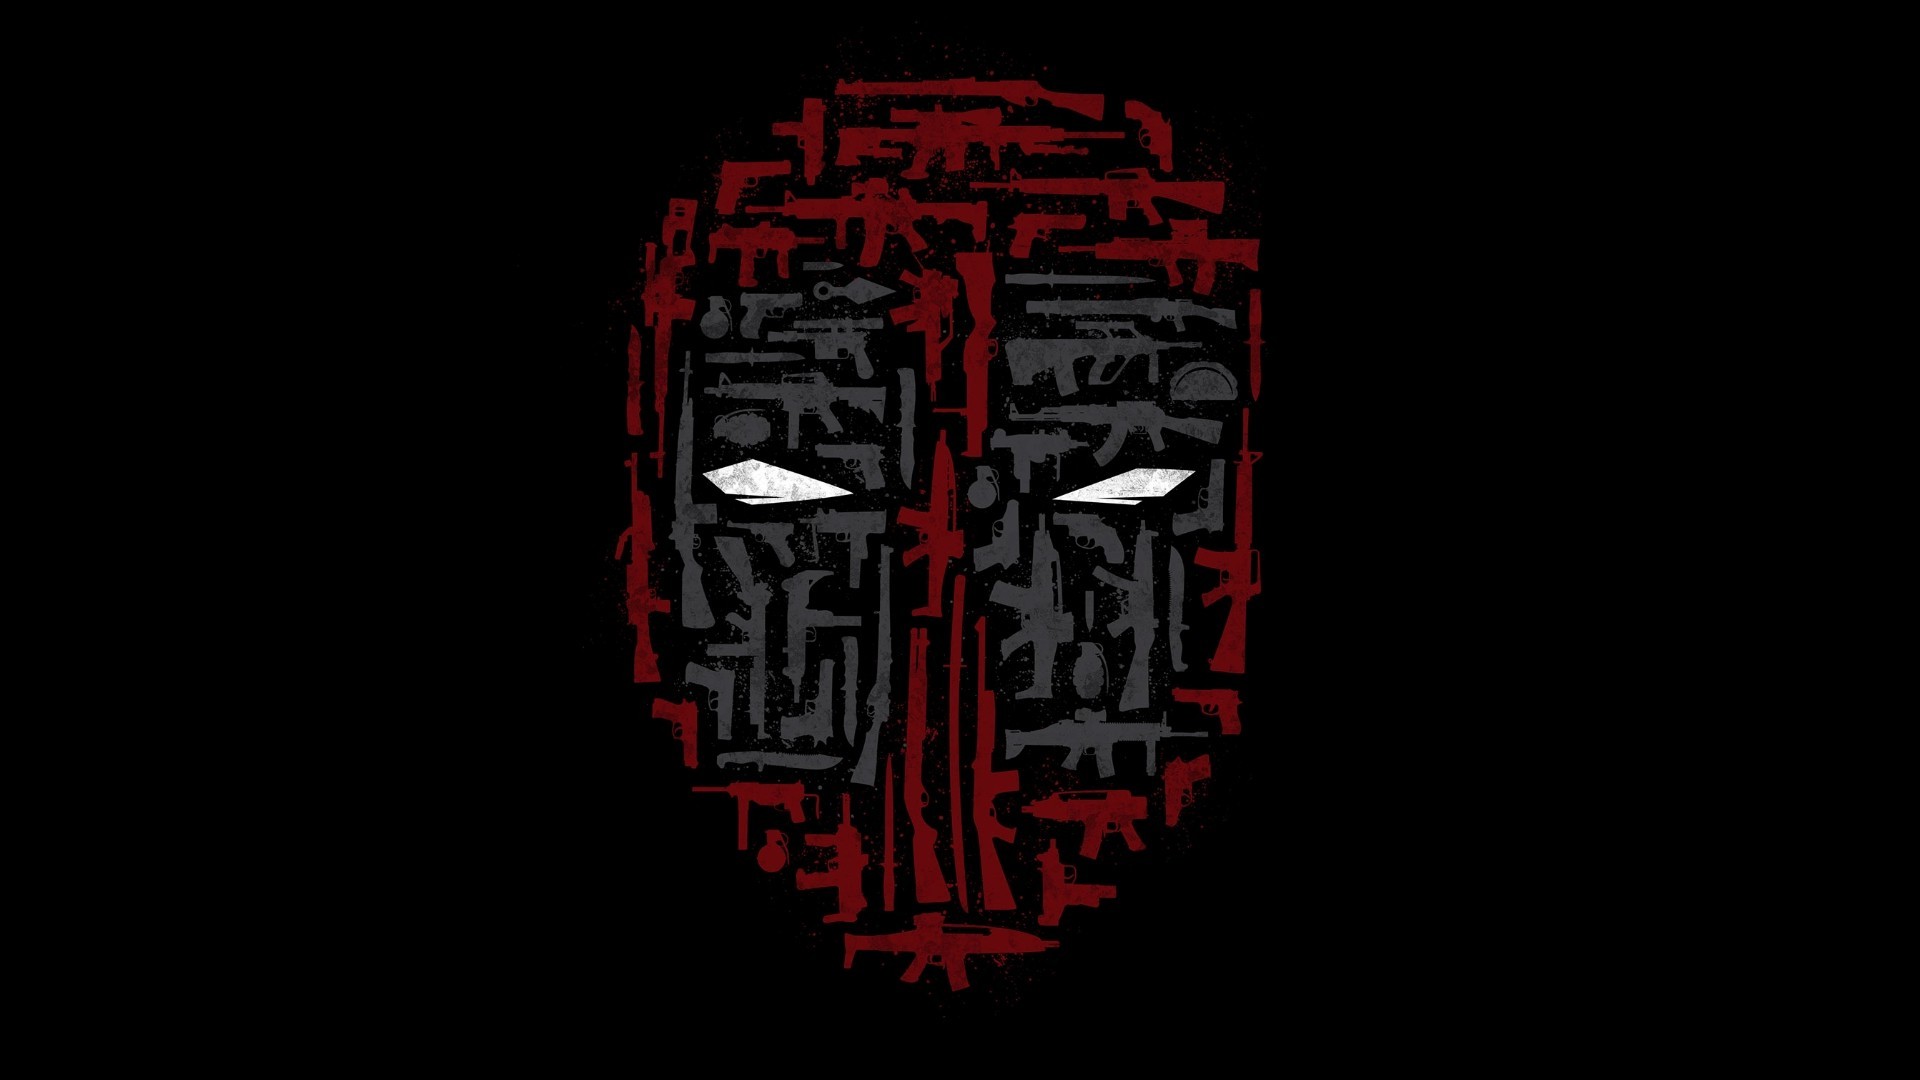 Deadpool, Weapon, Mask, Minimalism, Collage Wallpapers - Deadpool Hd Wallpaper For Mobile , HD Wallpaper & Backgrounds